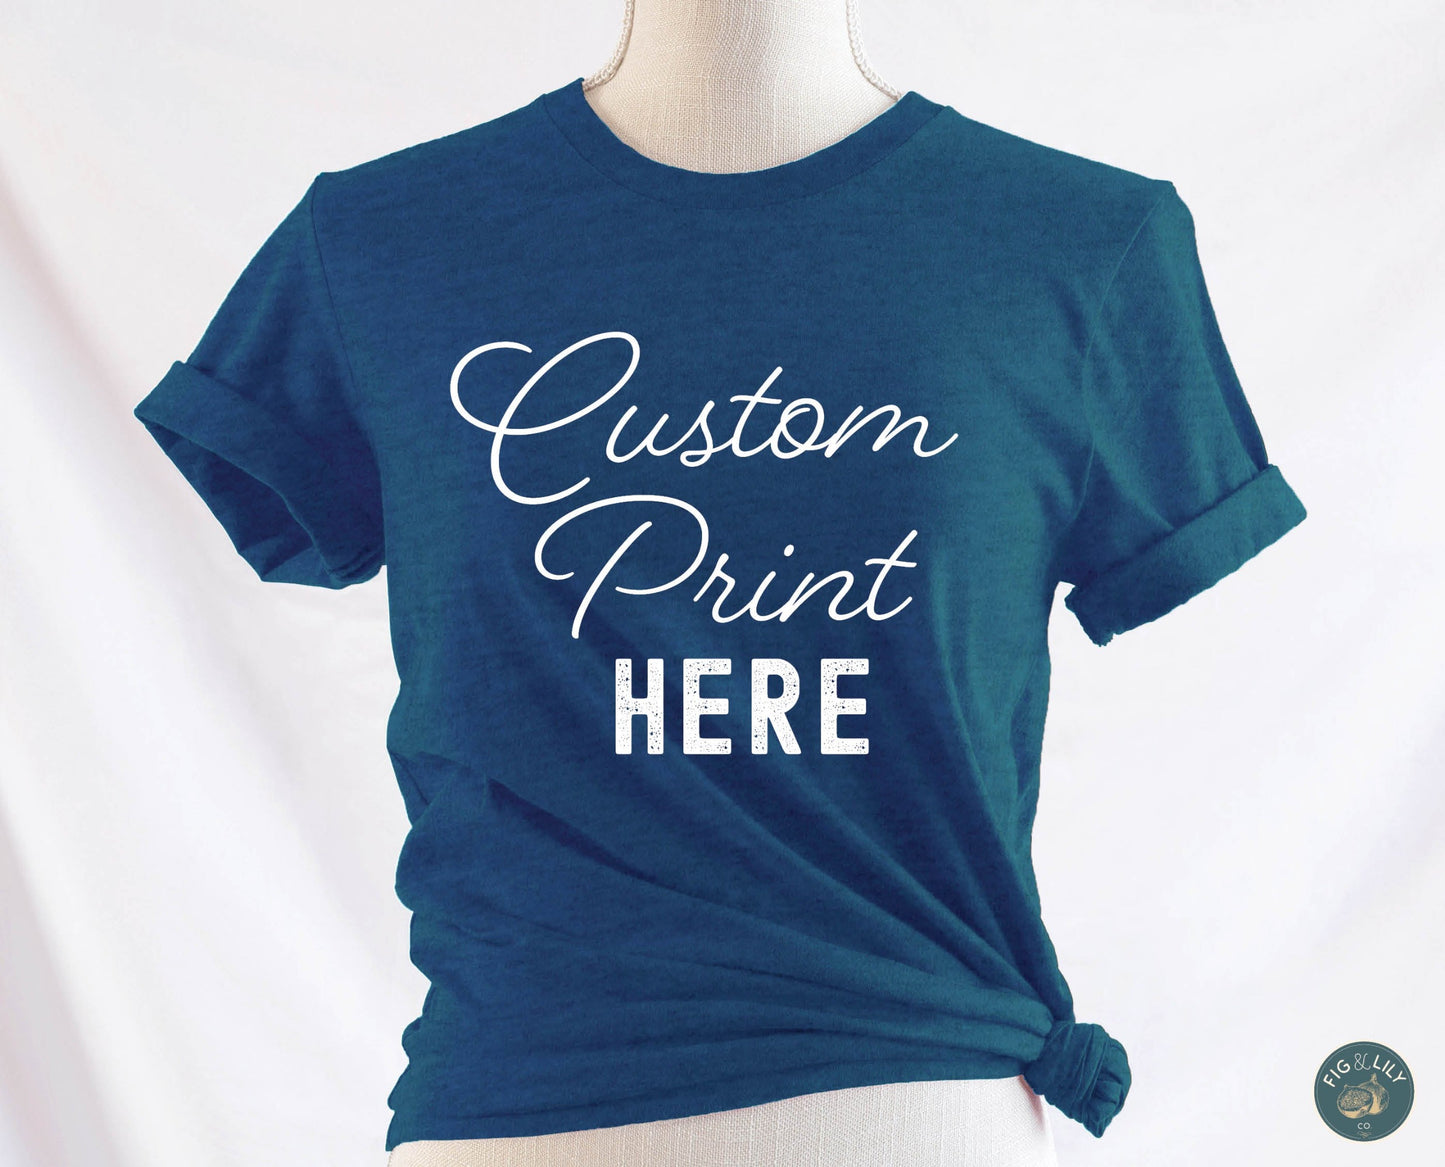 Fig & Lily Co. custom soft heather deep teal blueunisex t-shirt with your personalized design printed, custom graphic design tees for men and women